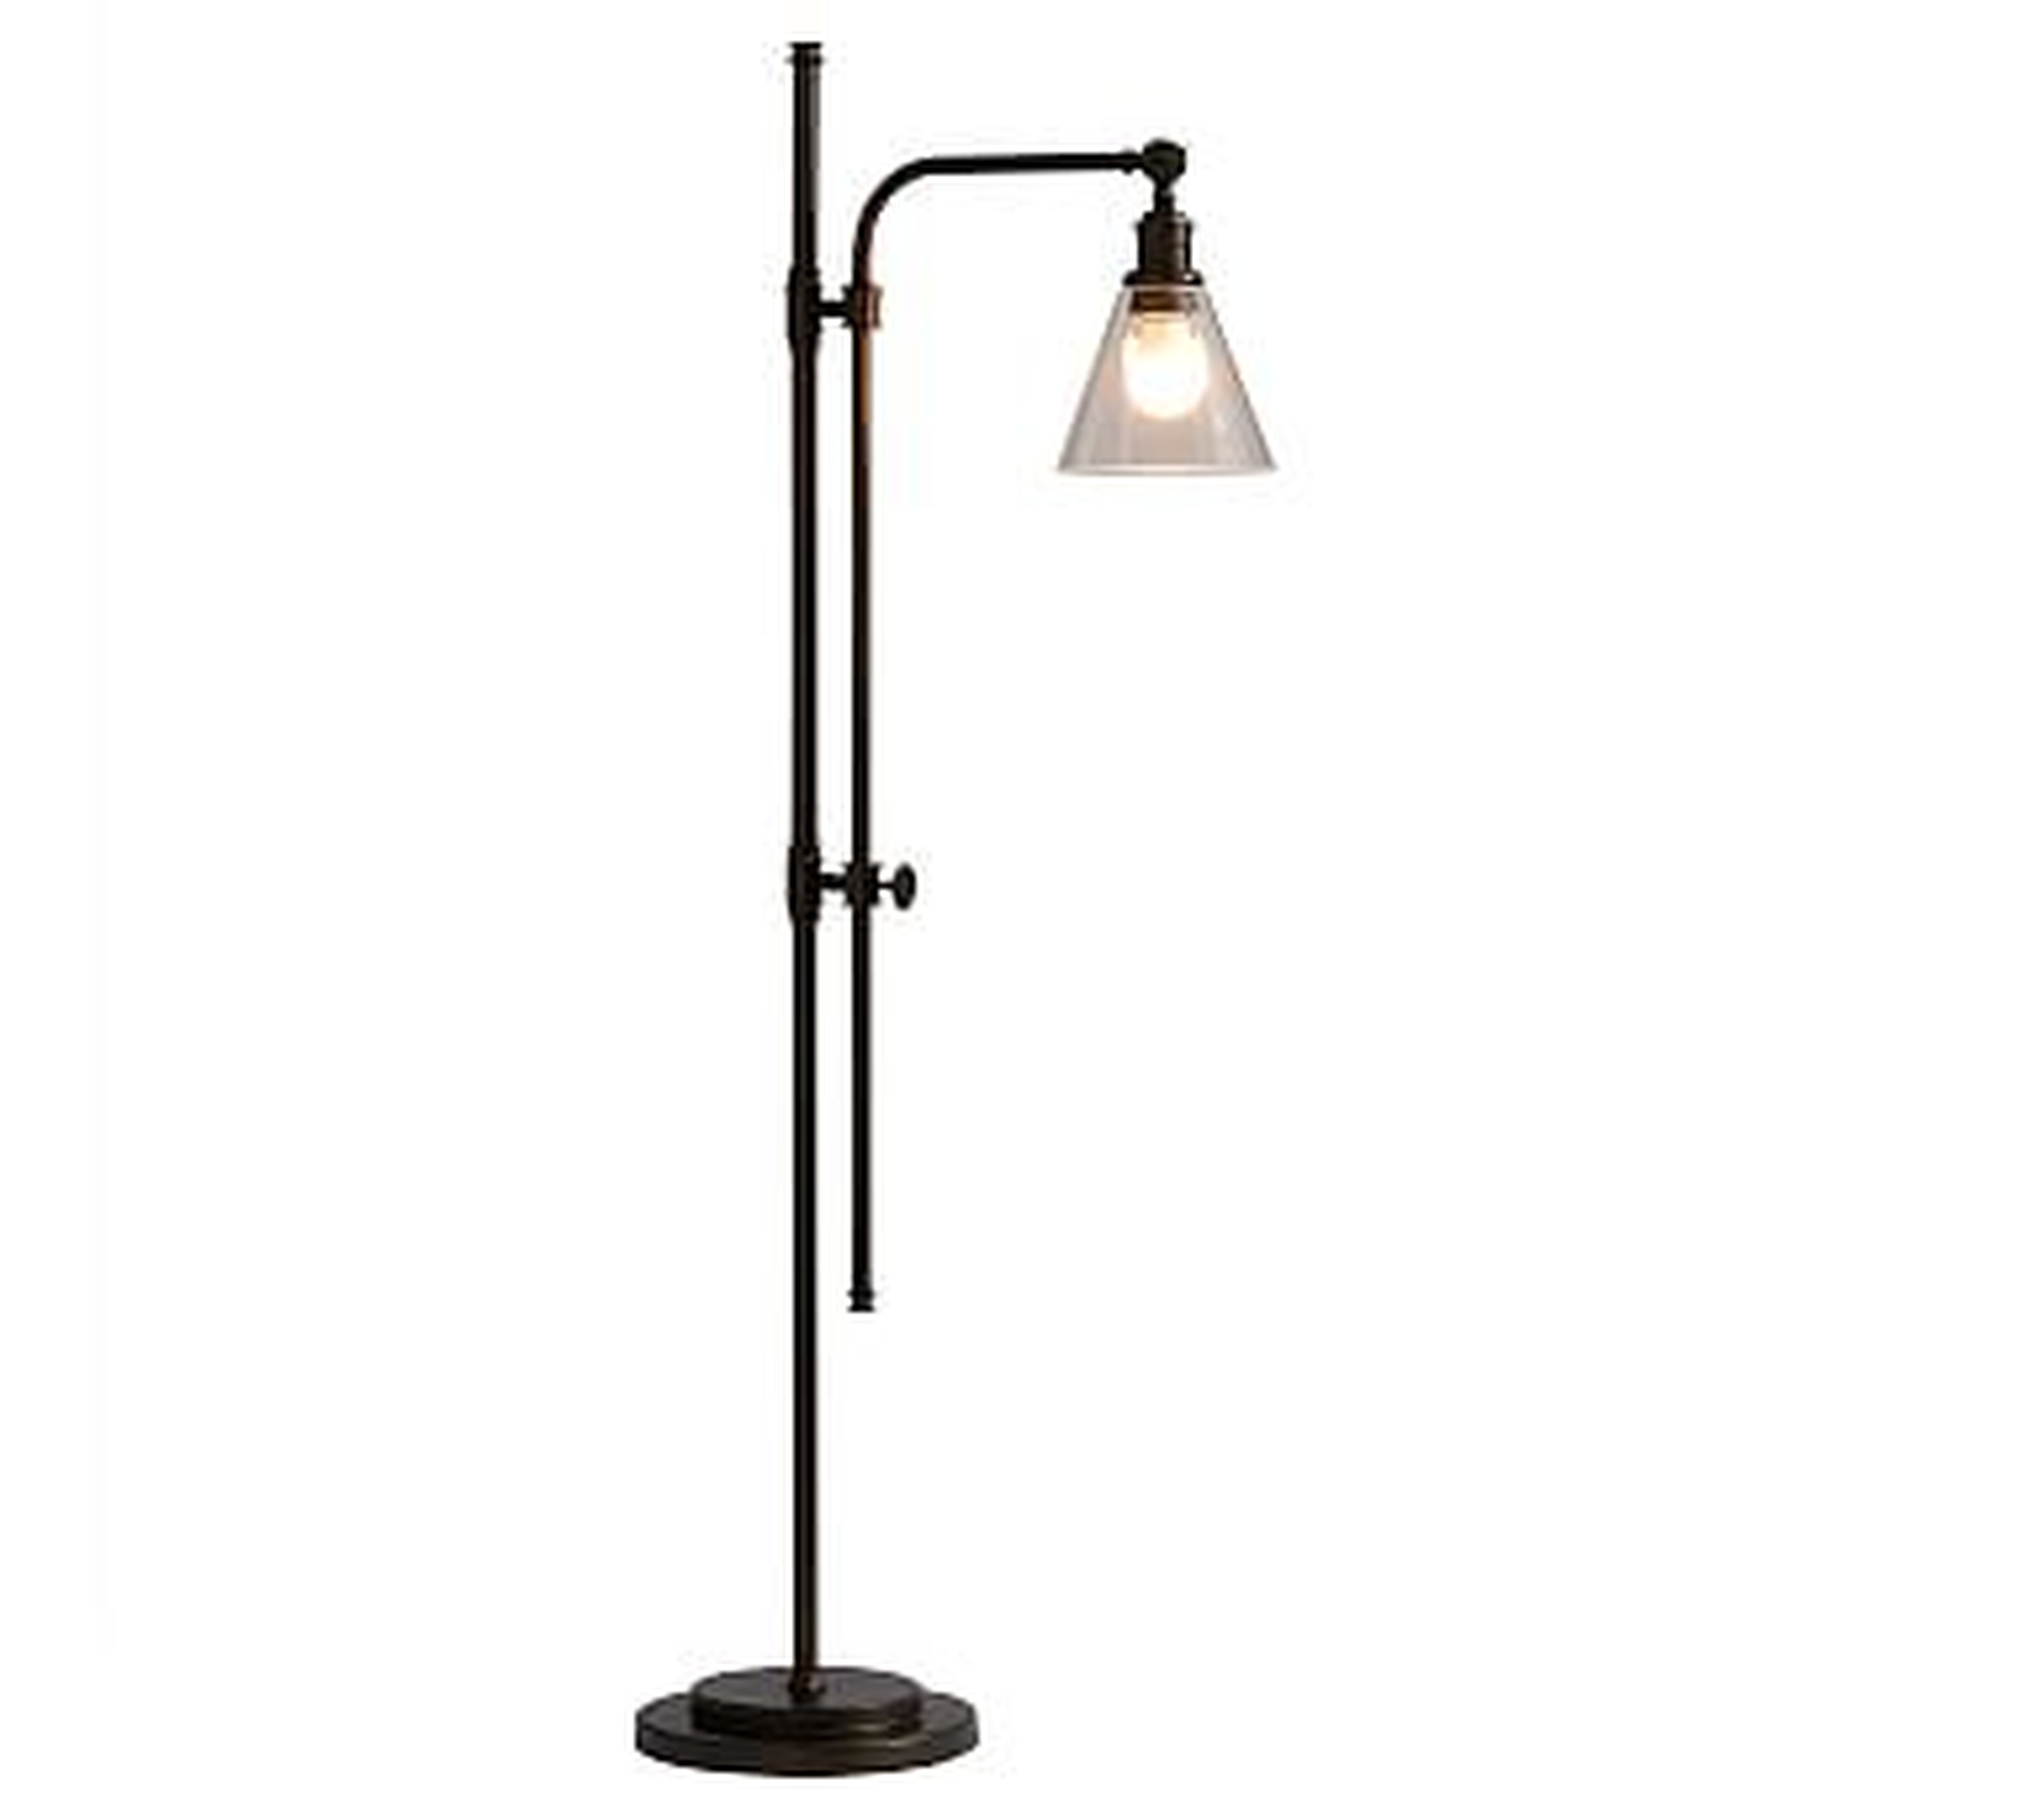 PB Classic Flared Glass Articulating Floor Lamp, Bronze Base - Pottery Barn